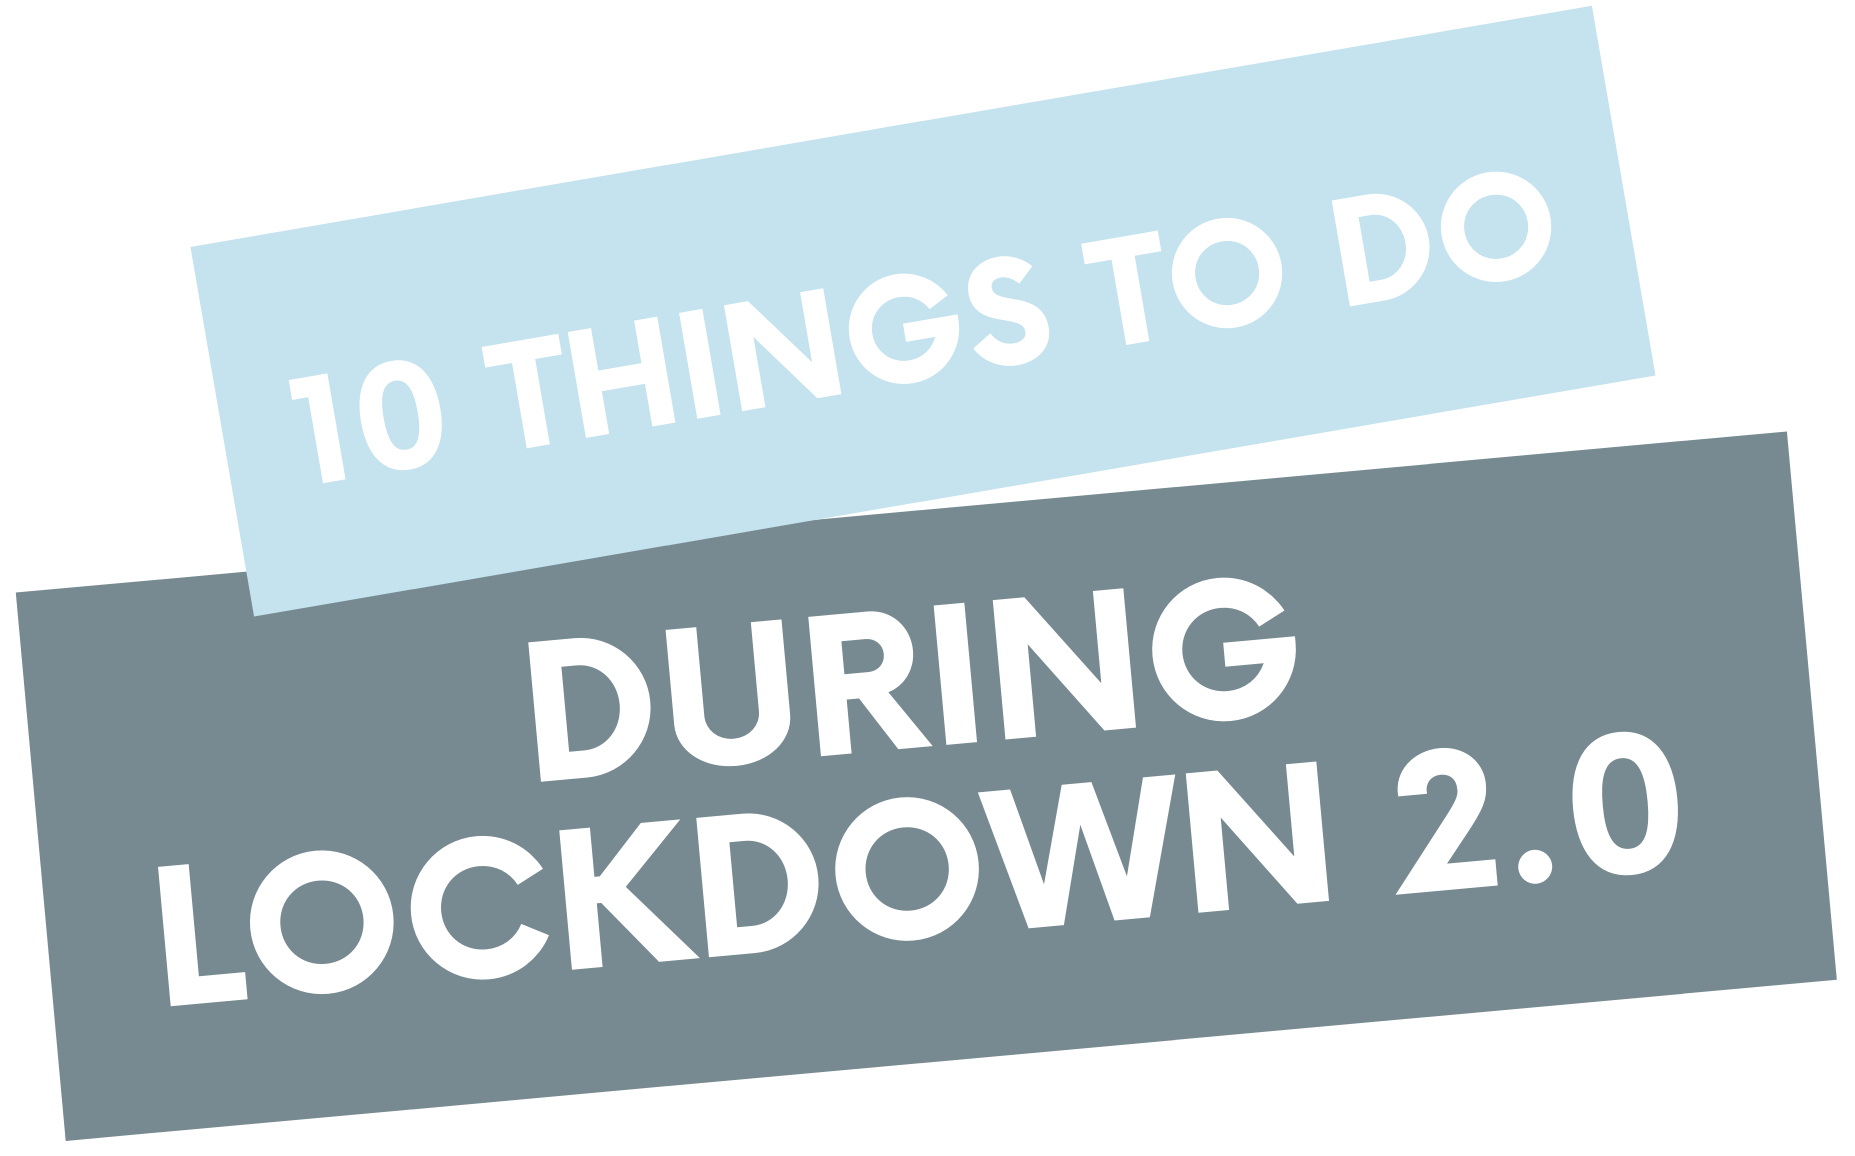 10 Things To Do During Lockdown 2.0